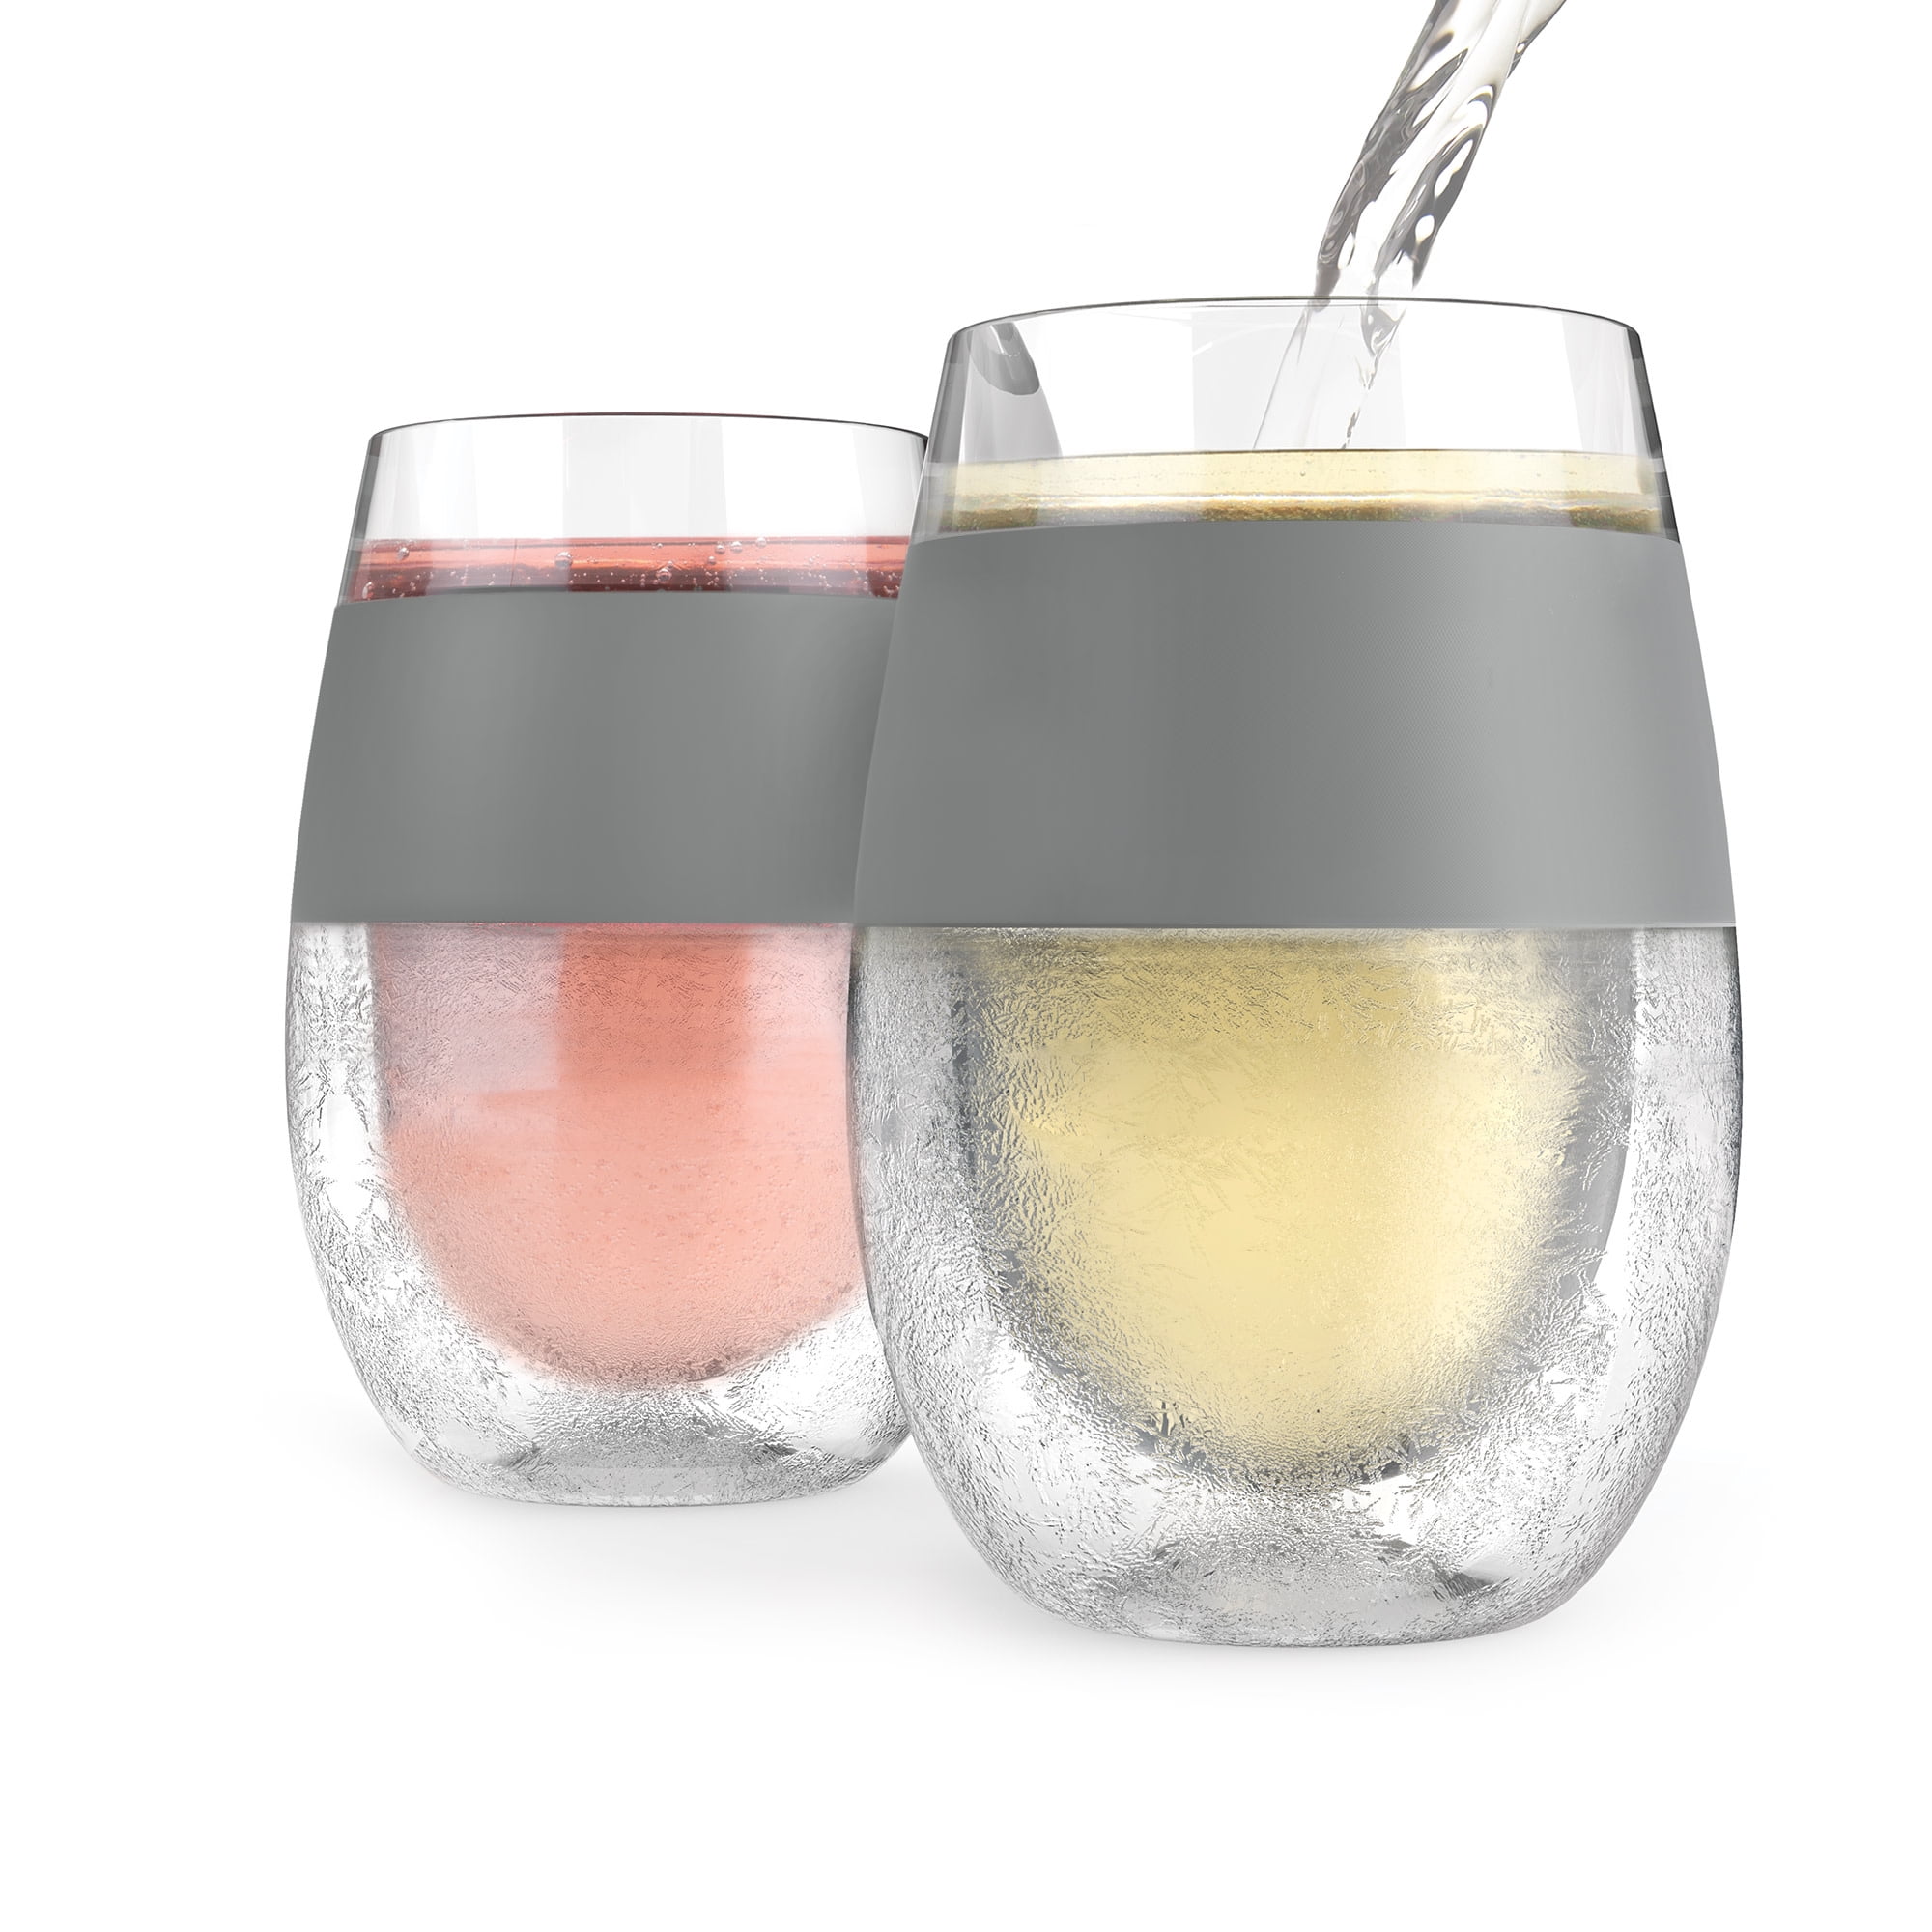 Host Wine Freeze XL Cup - 1 Pack, Pack of 1 - Kroger